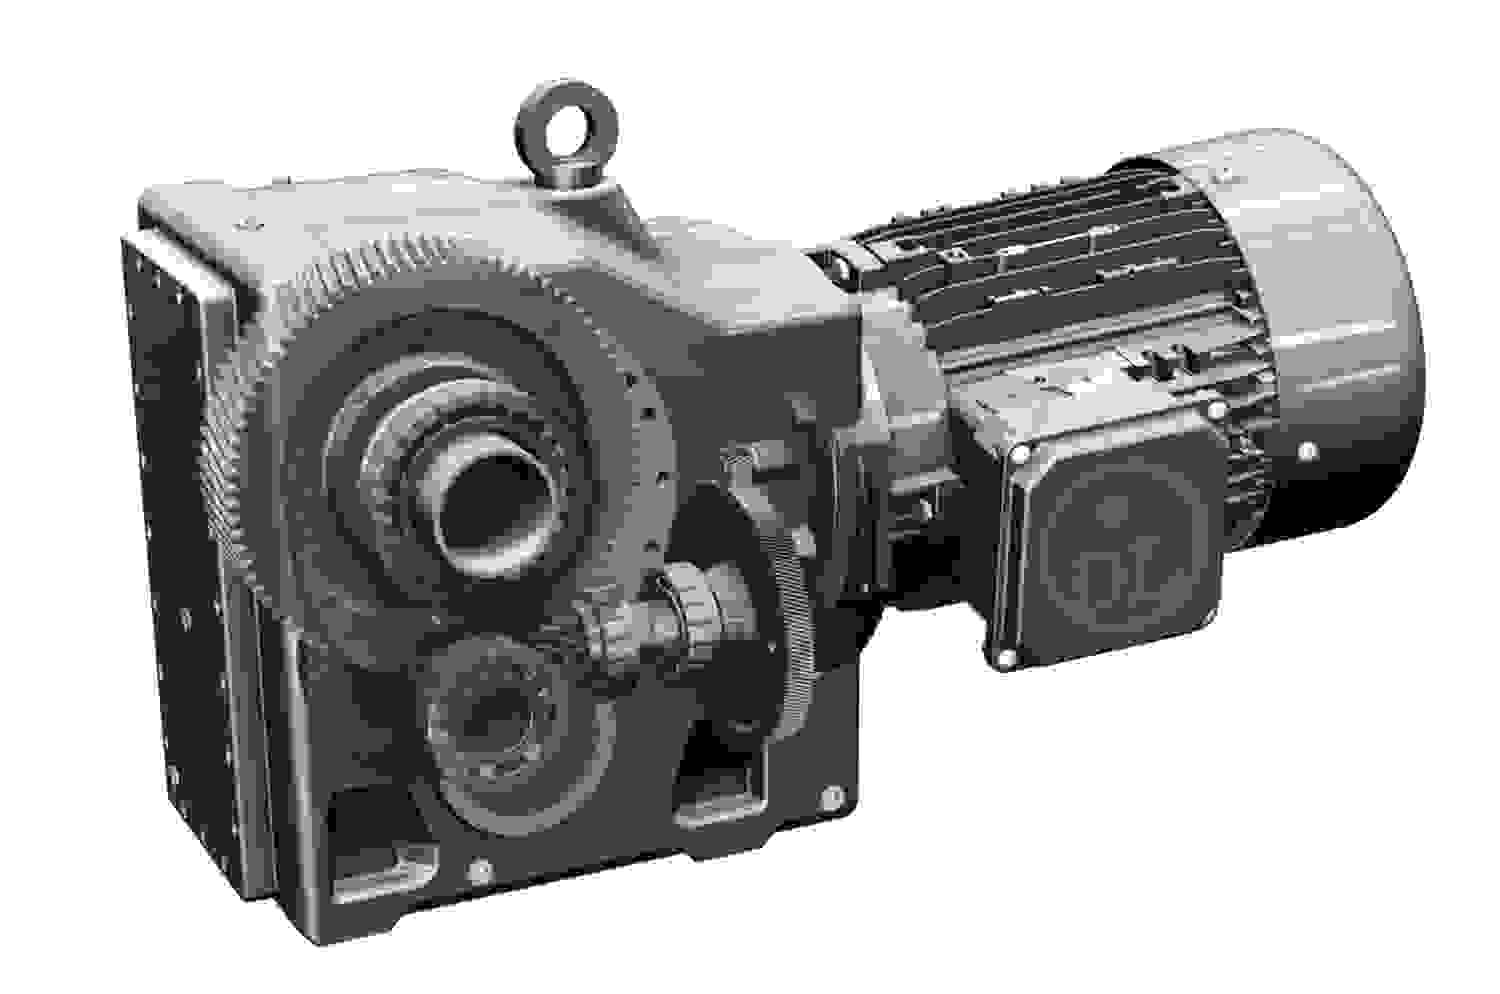 What are the performance benefits of 5-phase stepper motors?